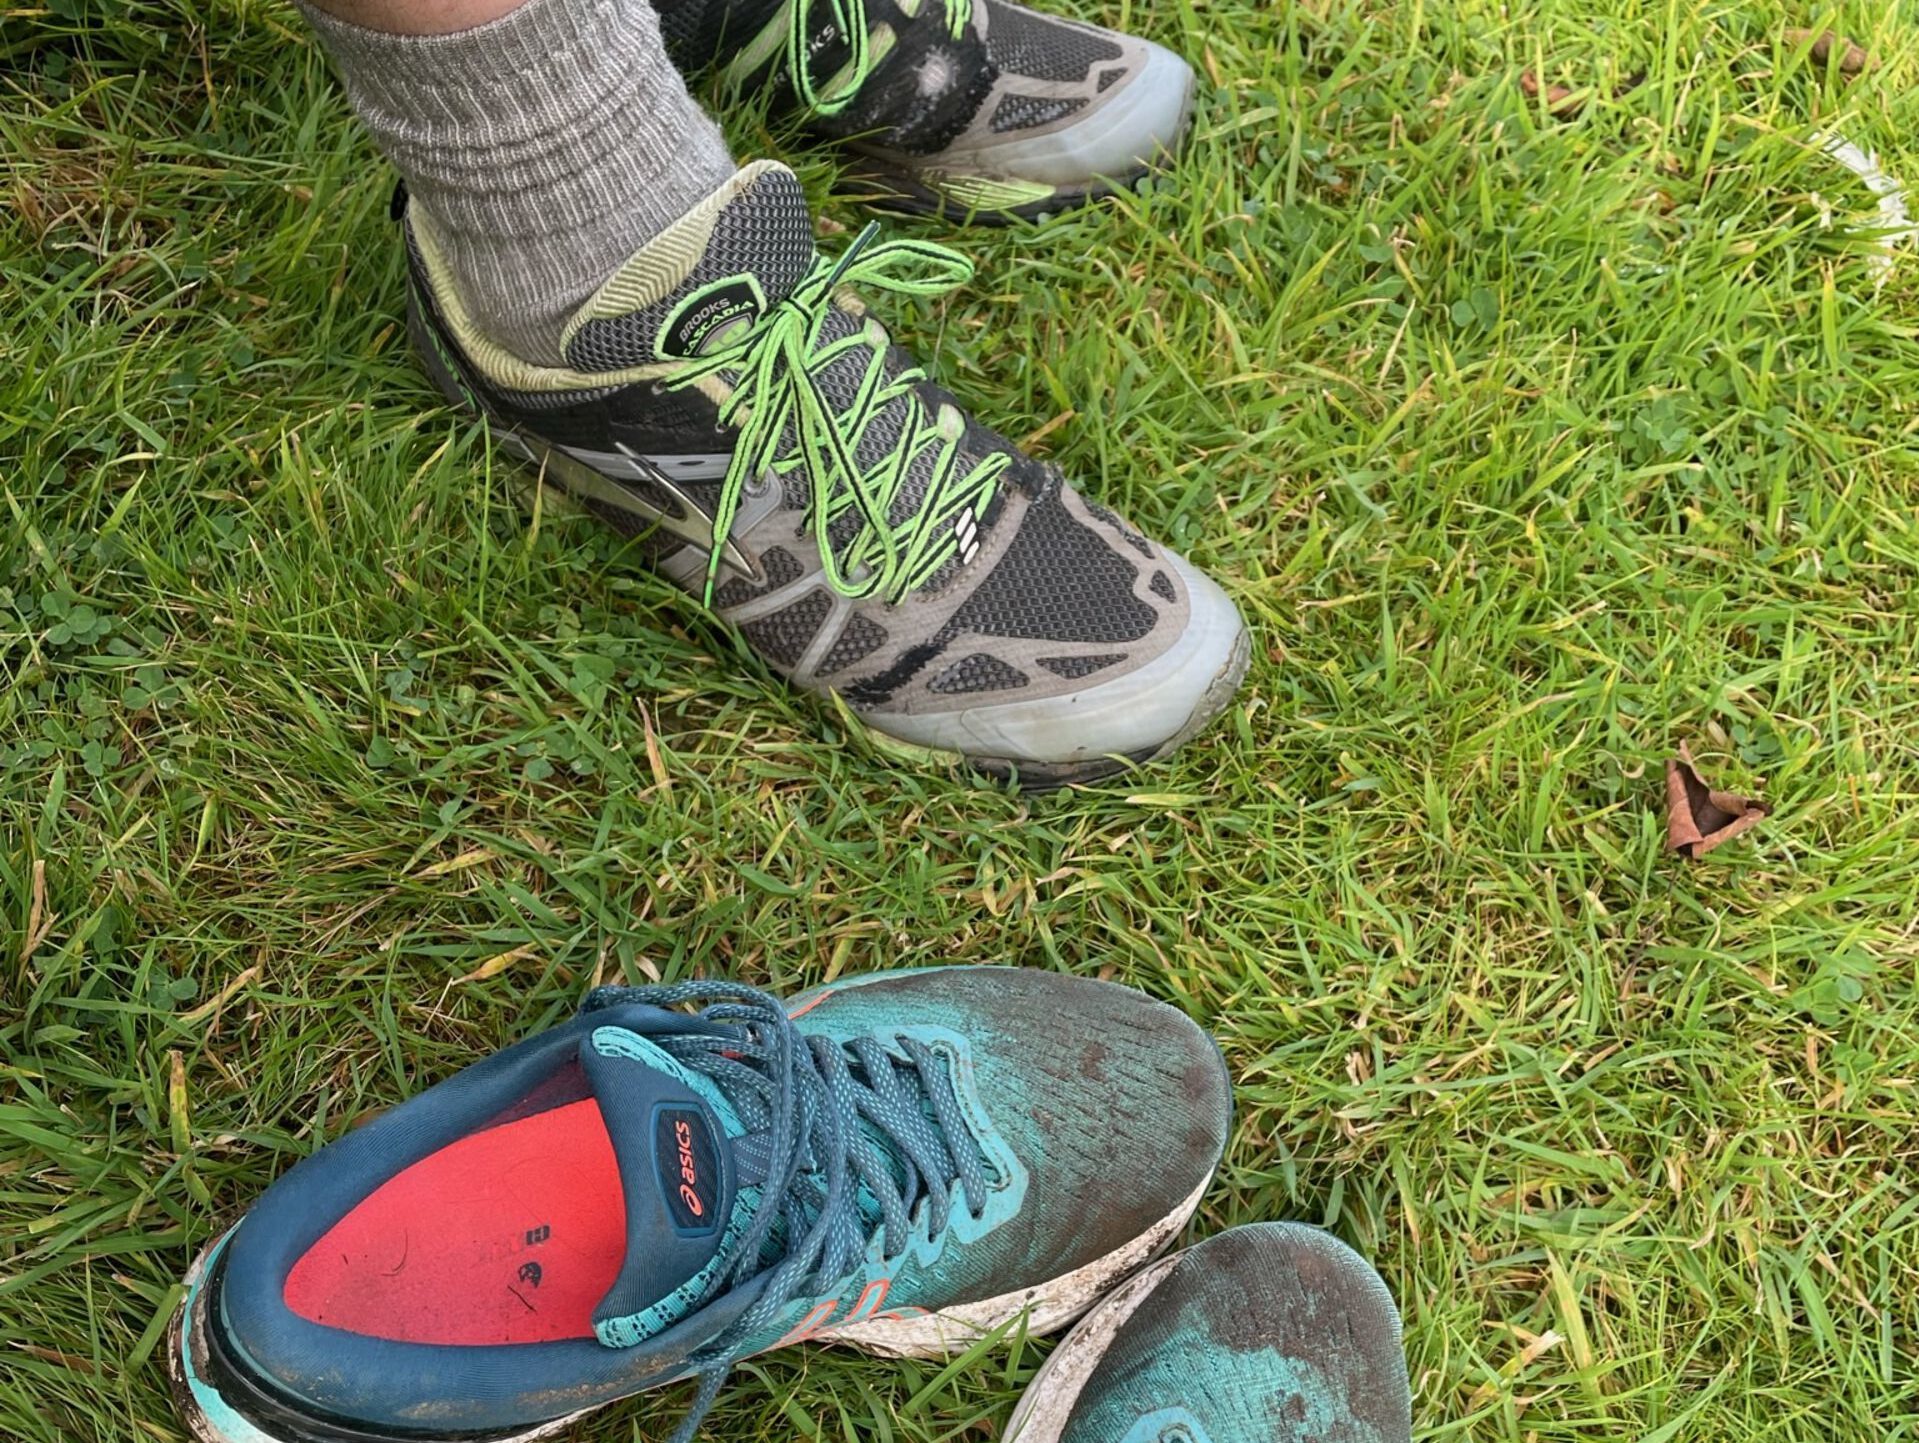 A pair of muddy shoes after the Danby Moors 5k trail run